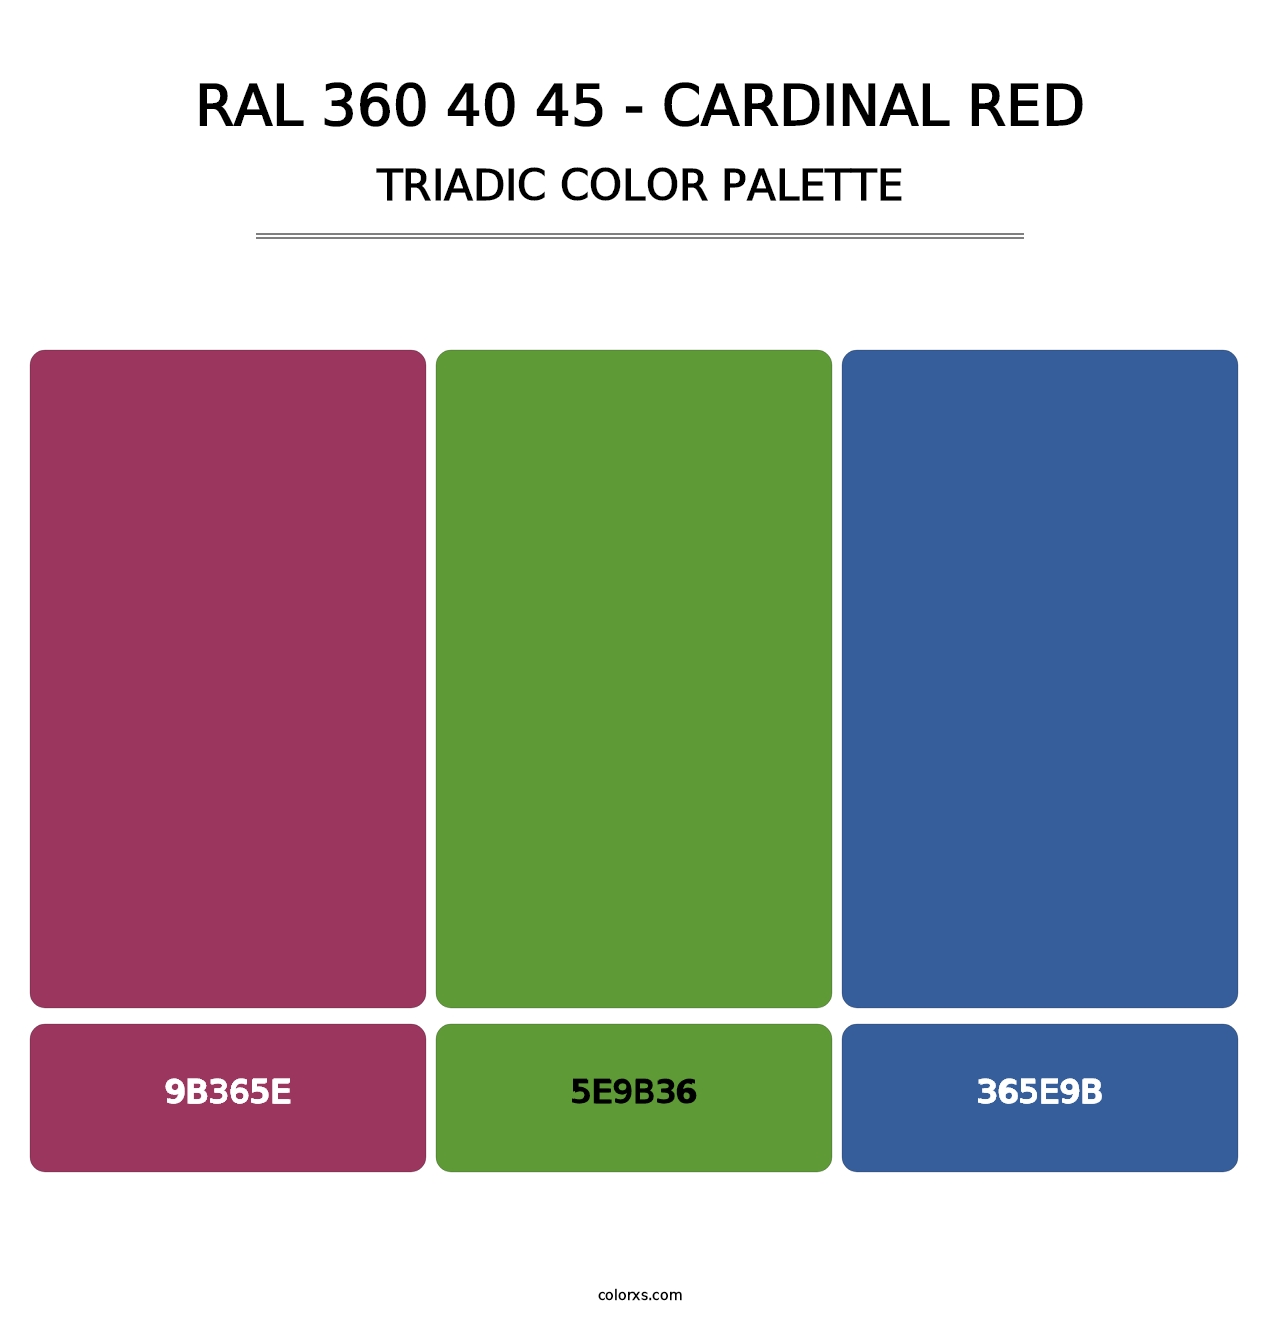 RAL 360 40 45 - Cardinal Red - Triadic Color Palette